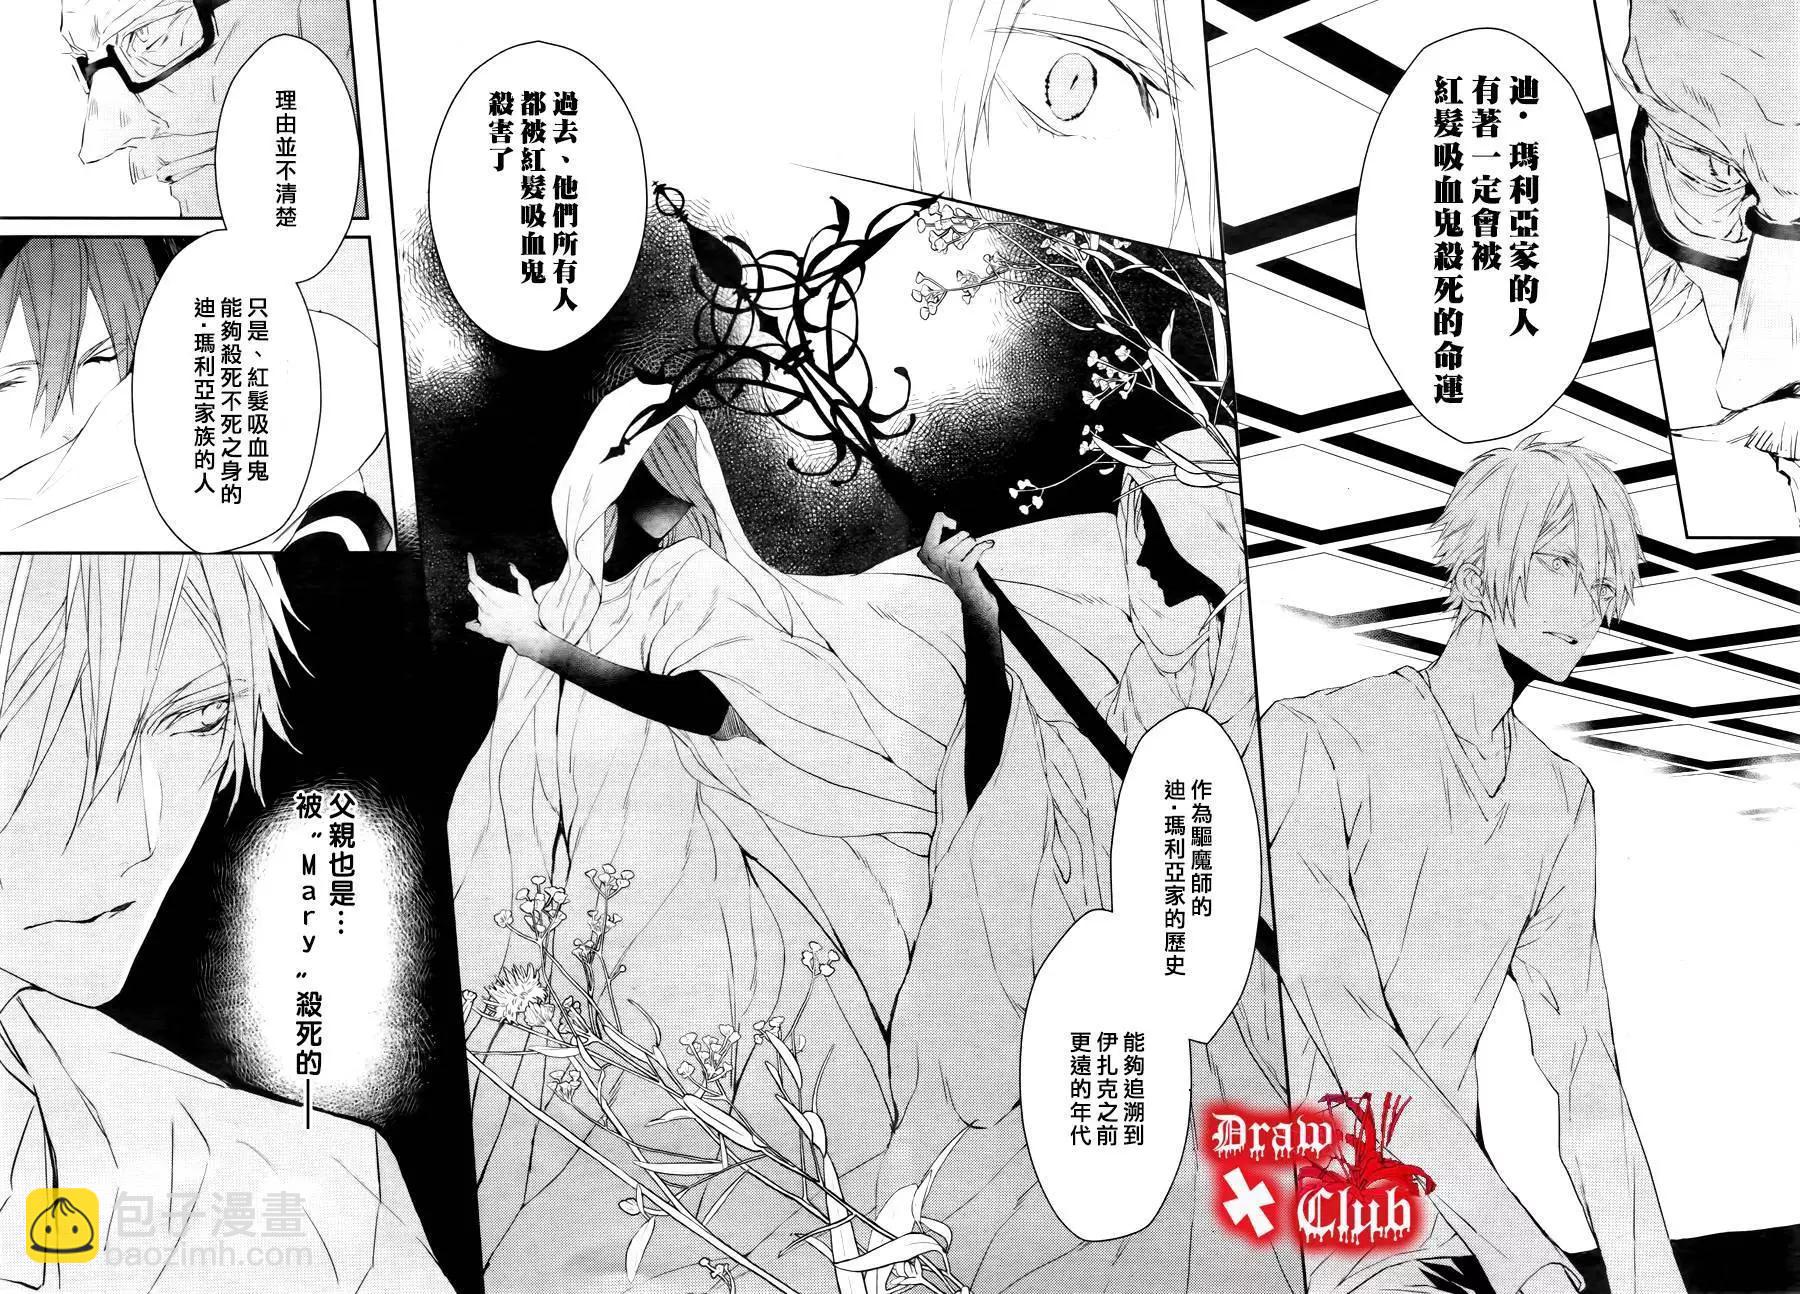 Bloody Mary - 第24回 - 6